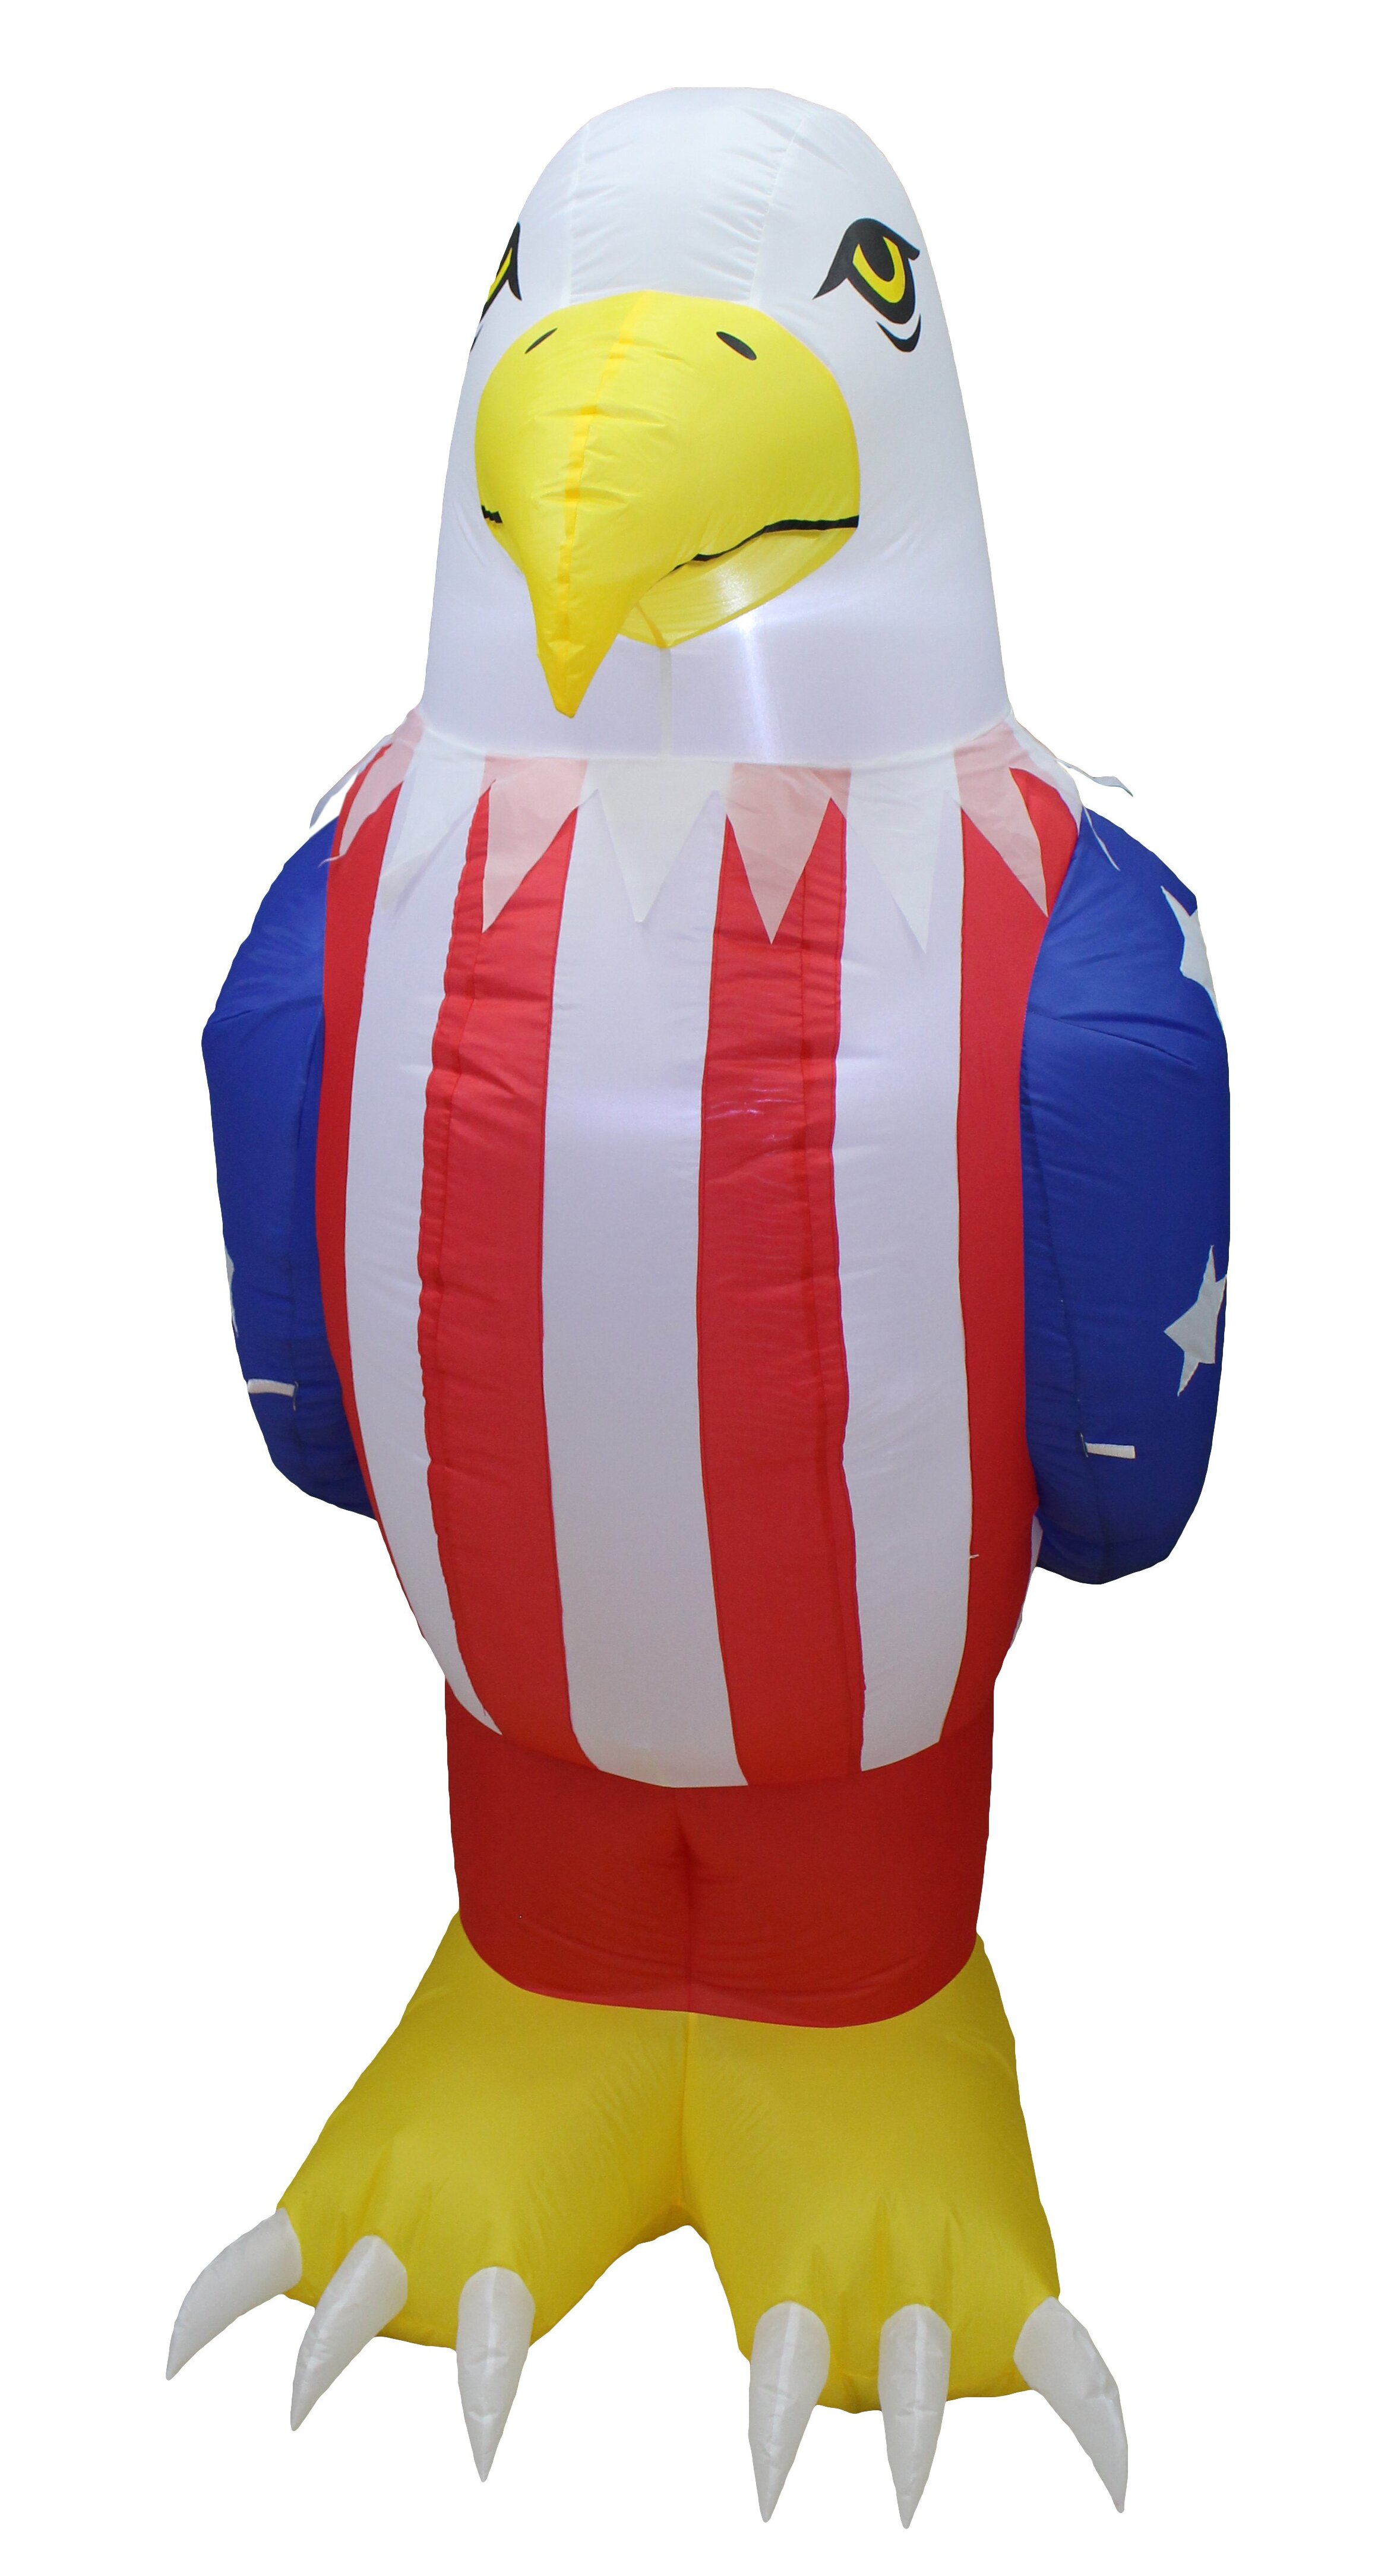 7 FT 4th of July Inflatable Decorations,American Flying Bald Eagle Decor with Build-in LEDs,Blow Up Yard Decoration Patriotic Independence Day Inflatables for Party Indoor Garden Decor Outdoor Lawn 